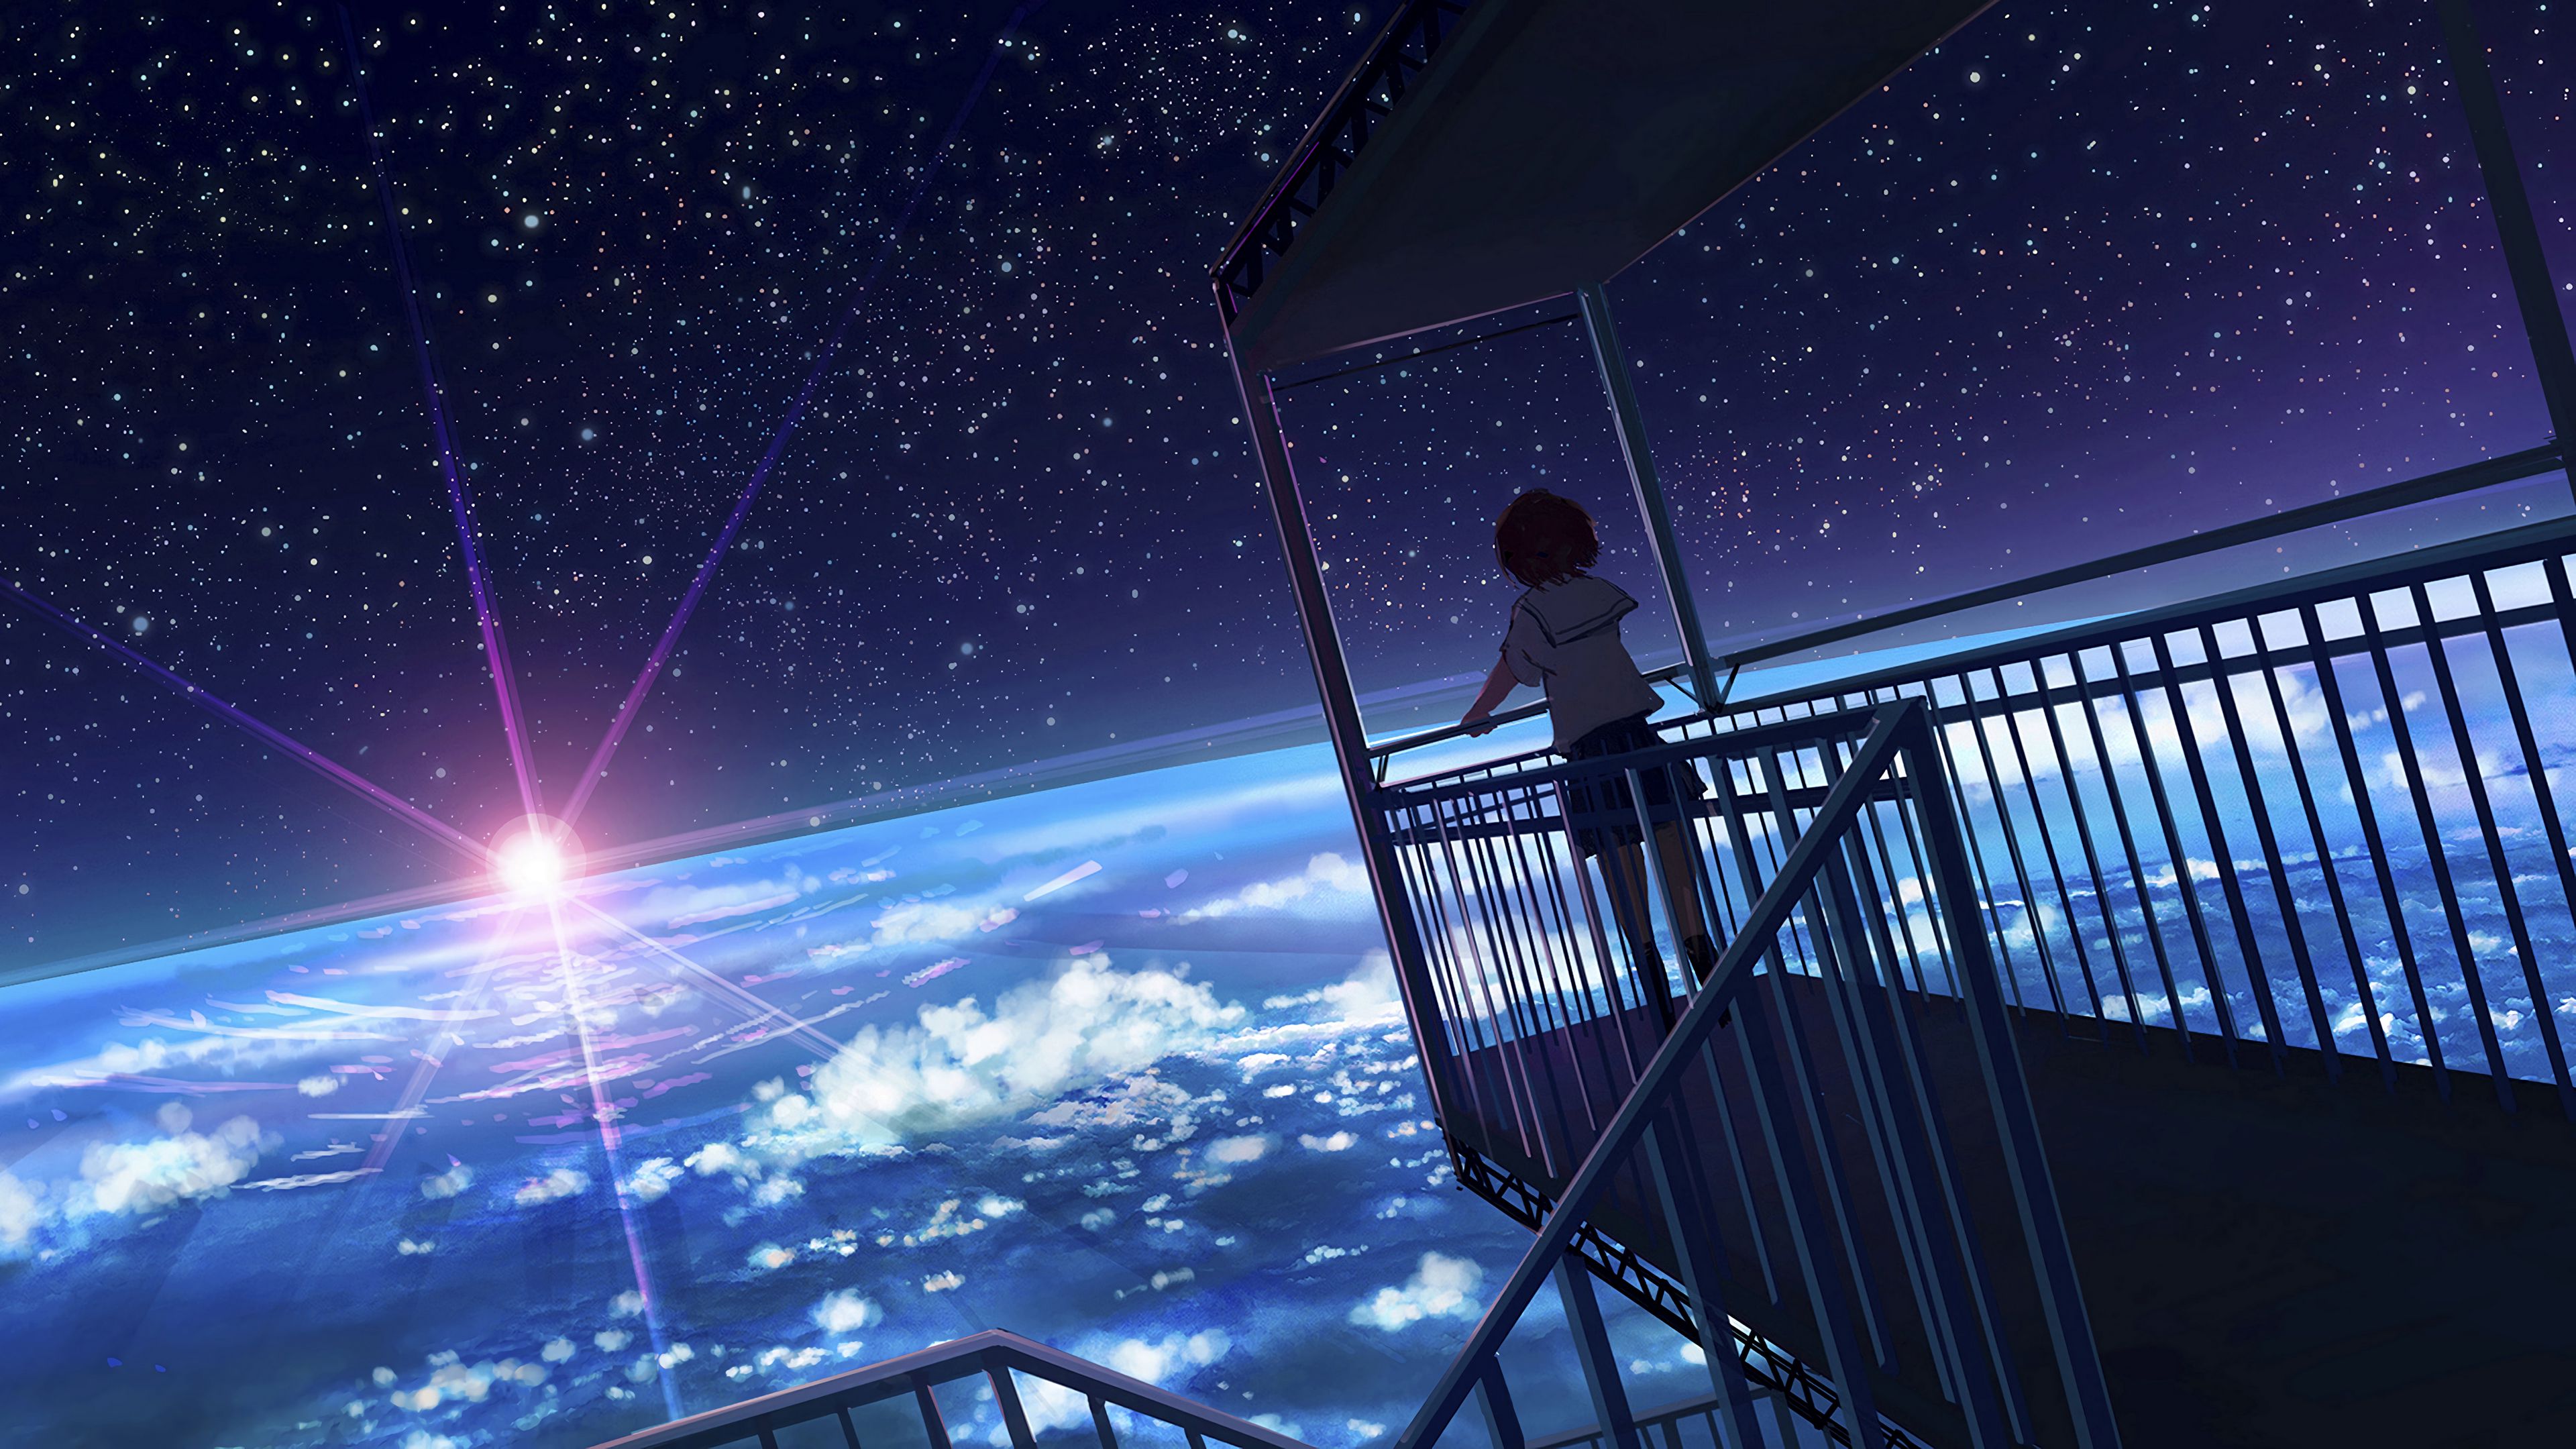 Download wallpaper 3840x2160 girl, form, view, earth, space, anime 4k uhd  16:9 hd background